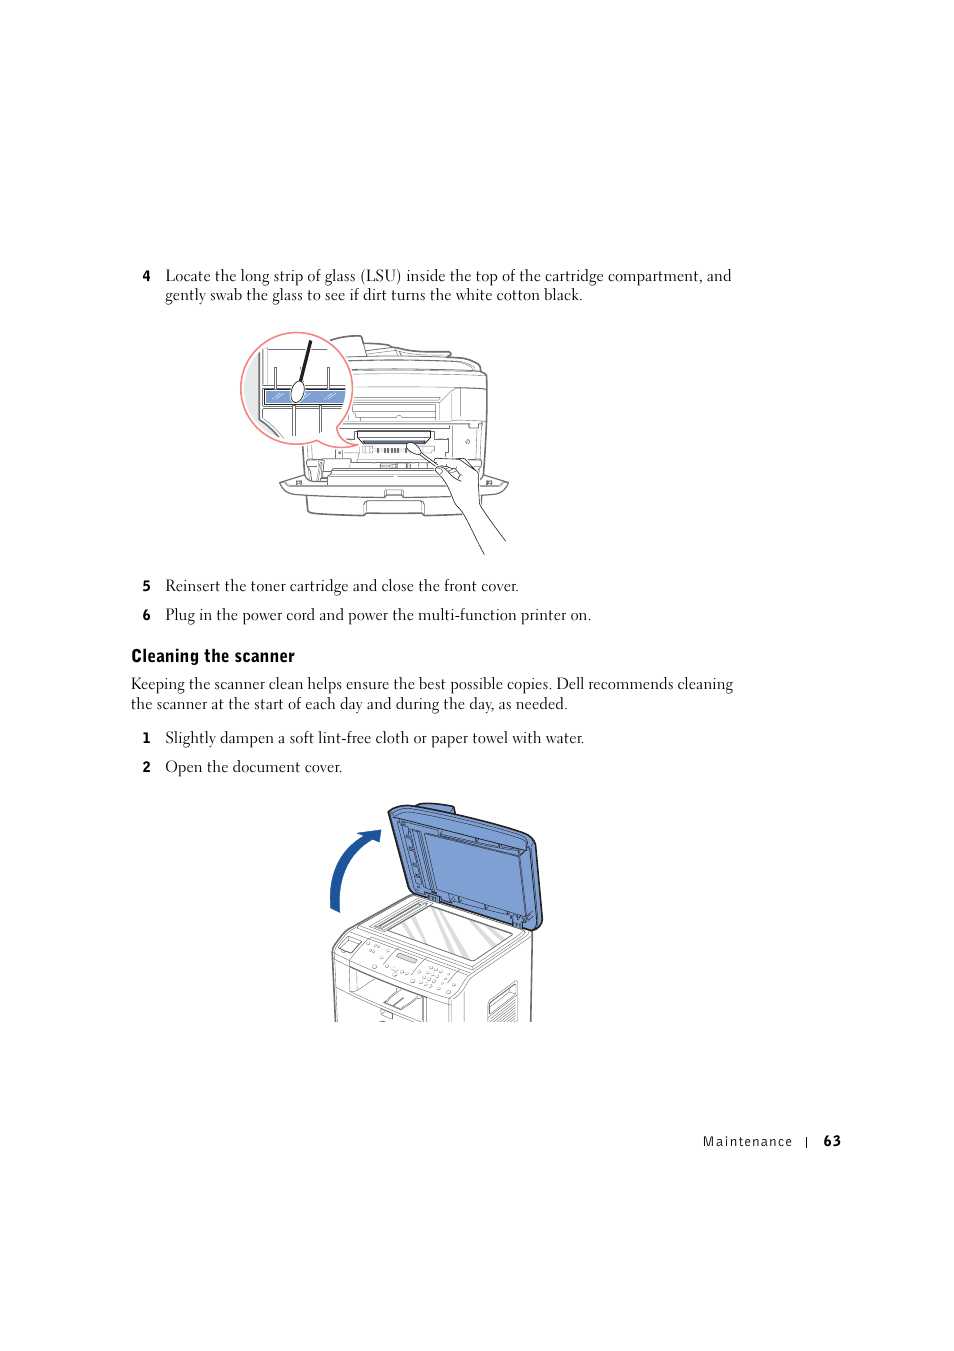 Cleaning the scanner | Dell 1600n Multifunction Mono Laser Printer User Manual | Page 73 / 134